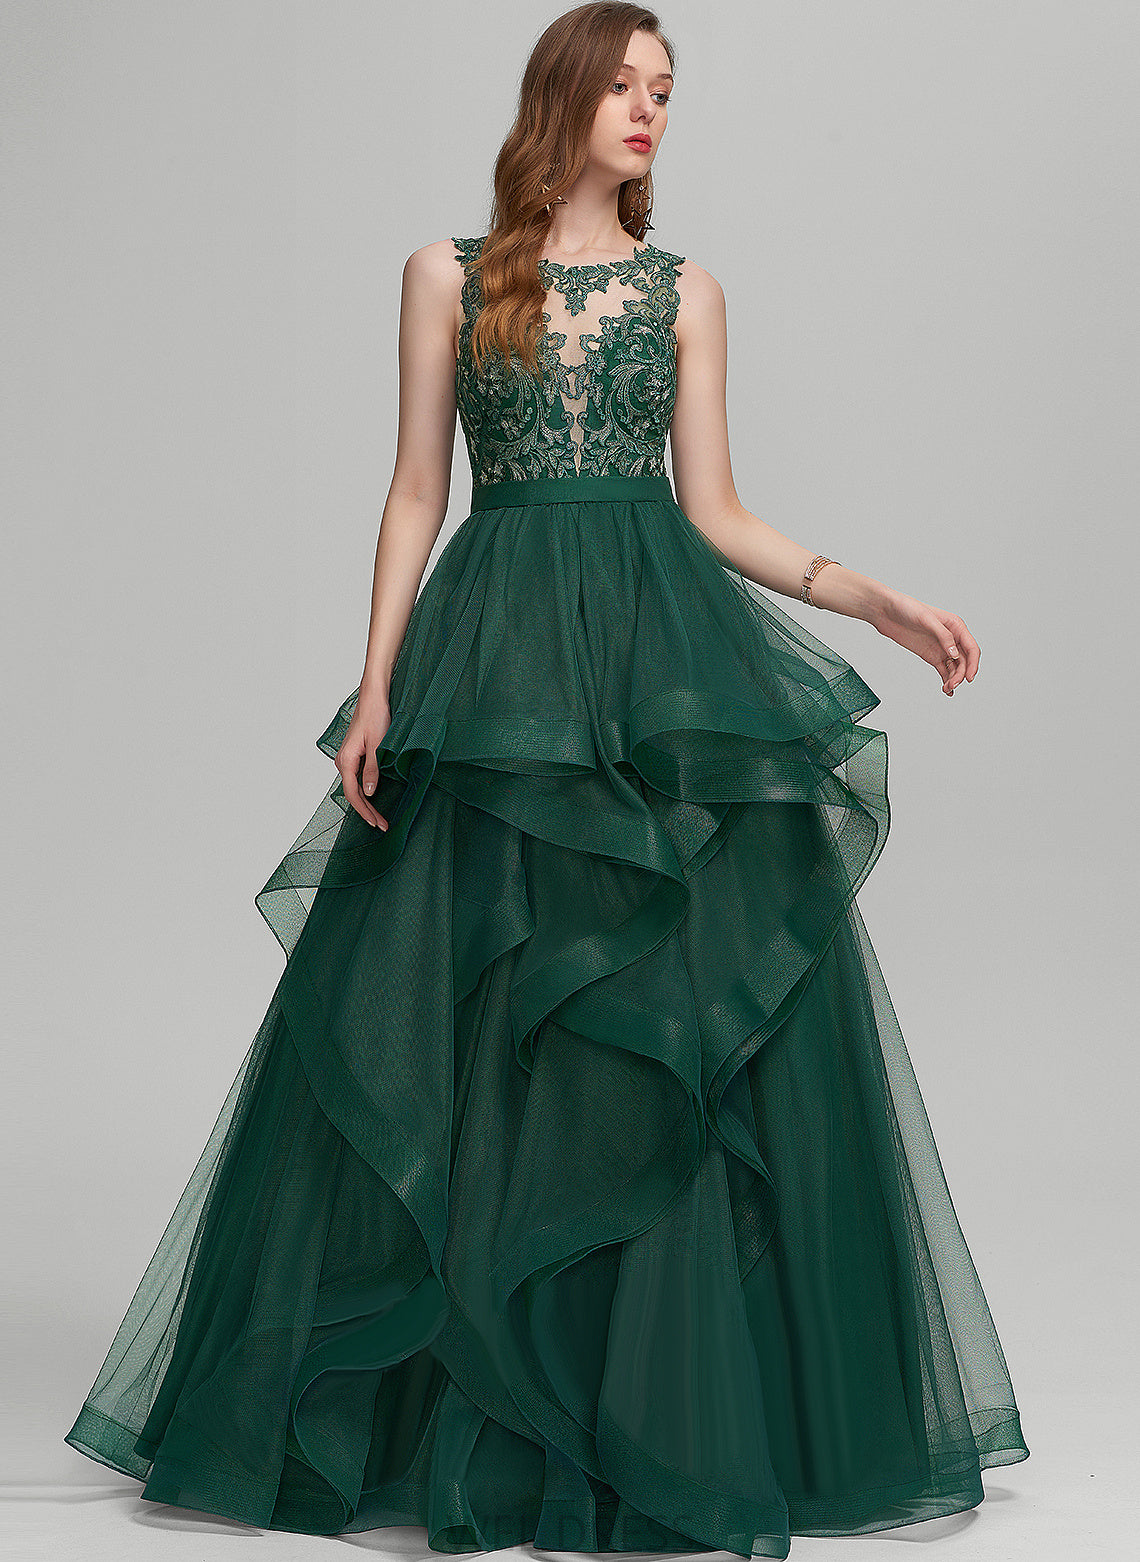 Tulle Floor-Length Prom Dresses Ball-Gown/Princess Illusion Scoop Lace Janiya